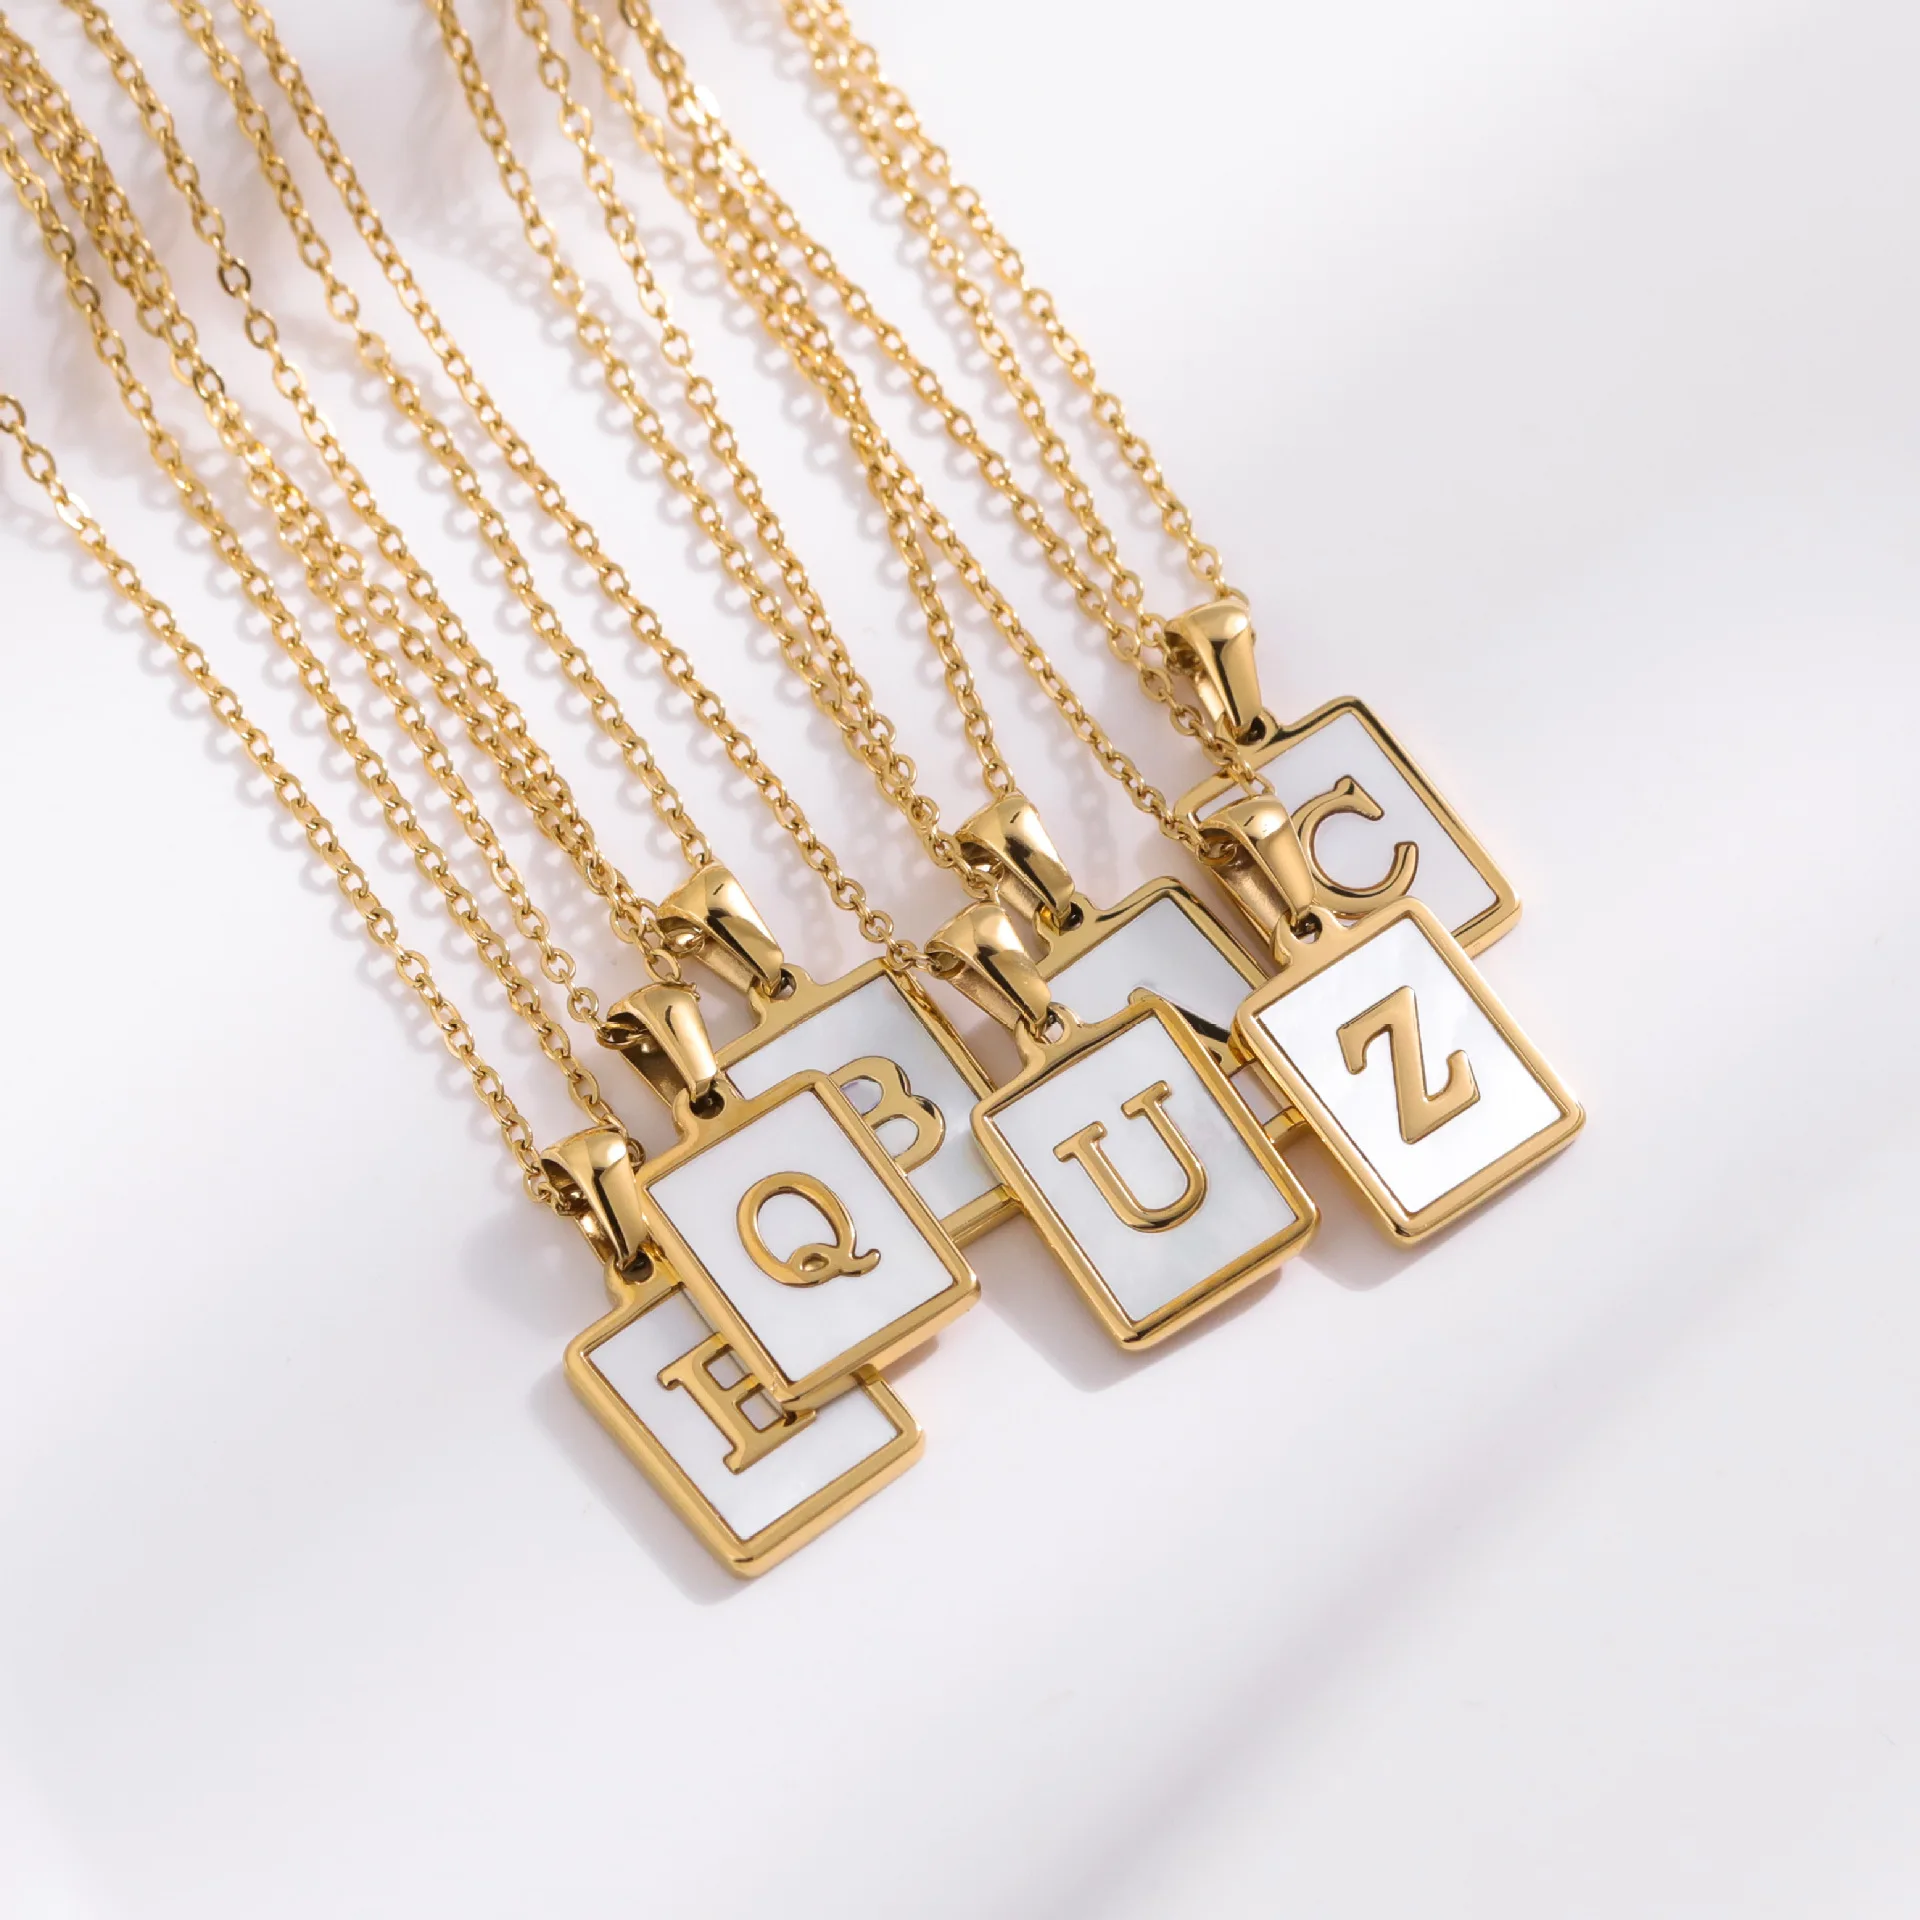 Minimalist Stainless Steel Shells Letter Pendant Necklace Women Fashion Real Gold Plated Alphabet Necklace Jewelry